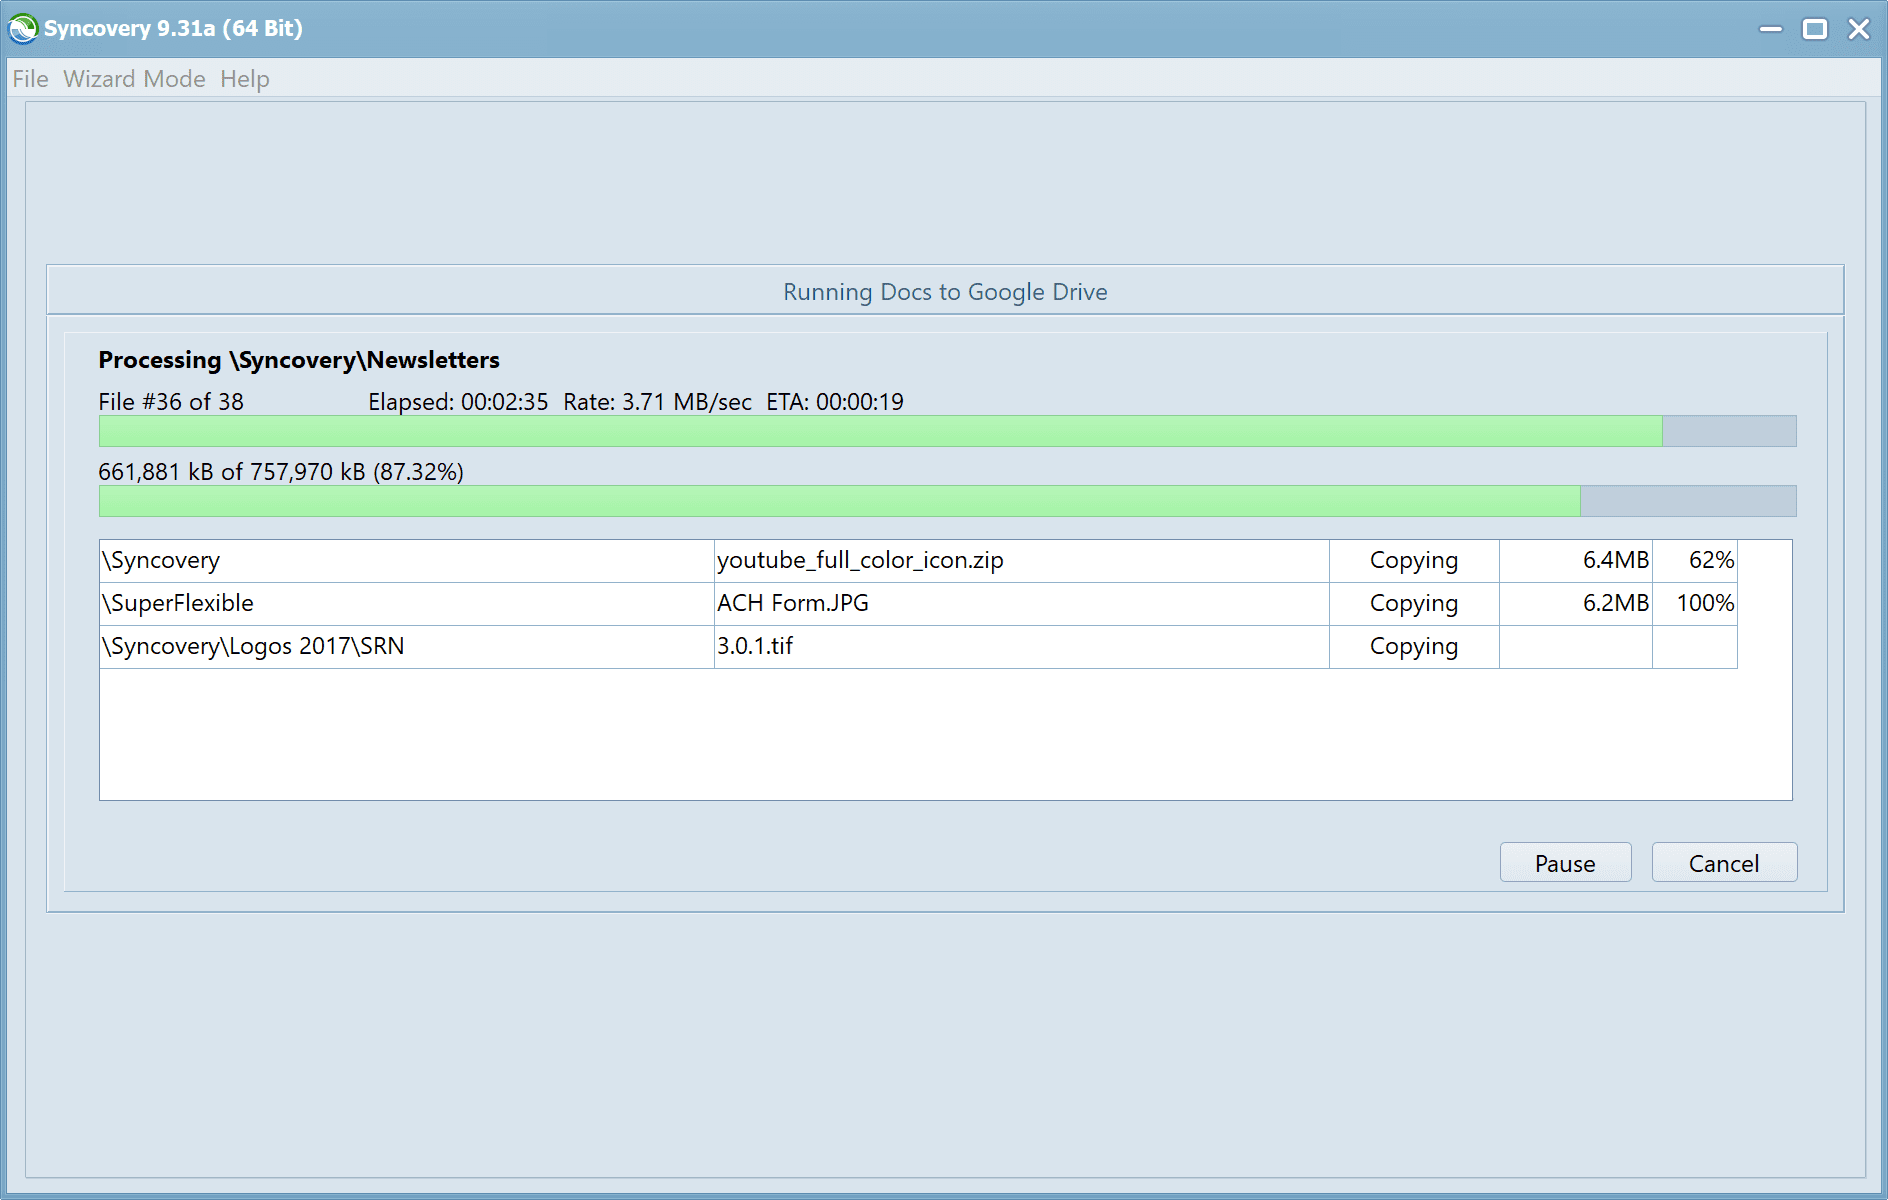 Screenshot of Syncovery's copying progress dialog windows, showing how files are copied and how the progress percentage and ETA is